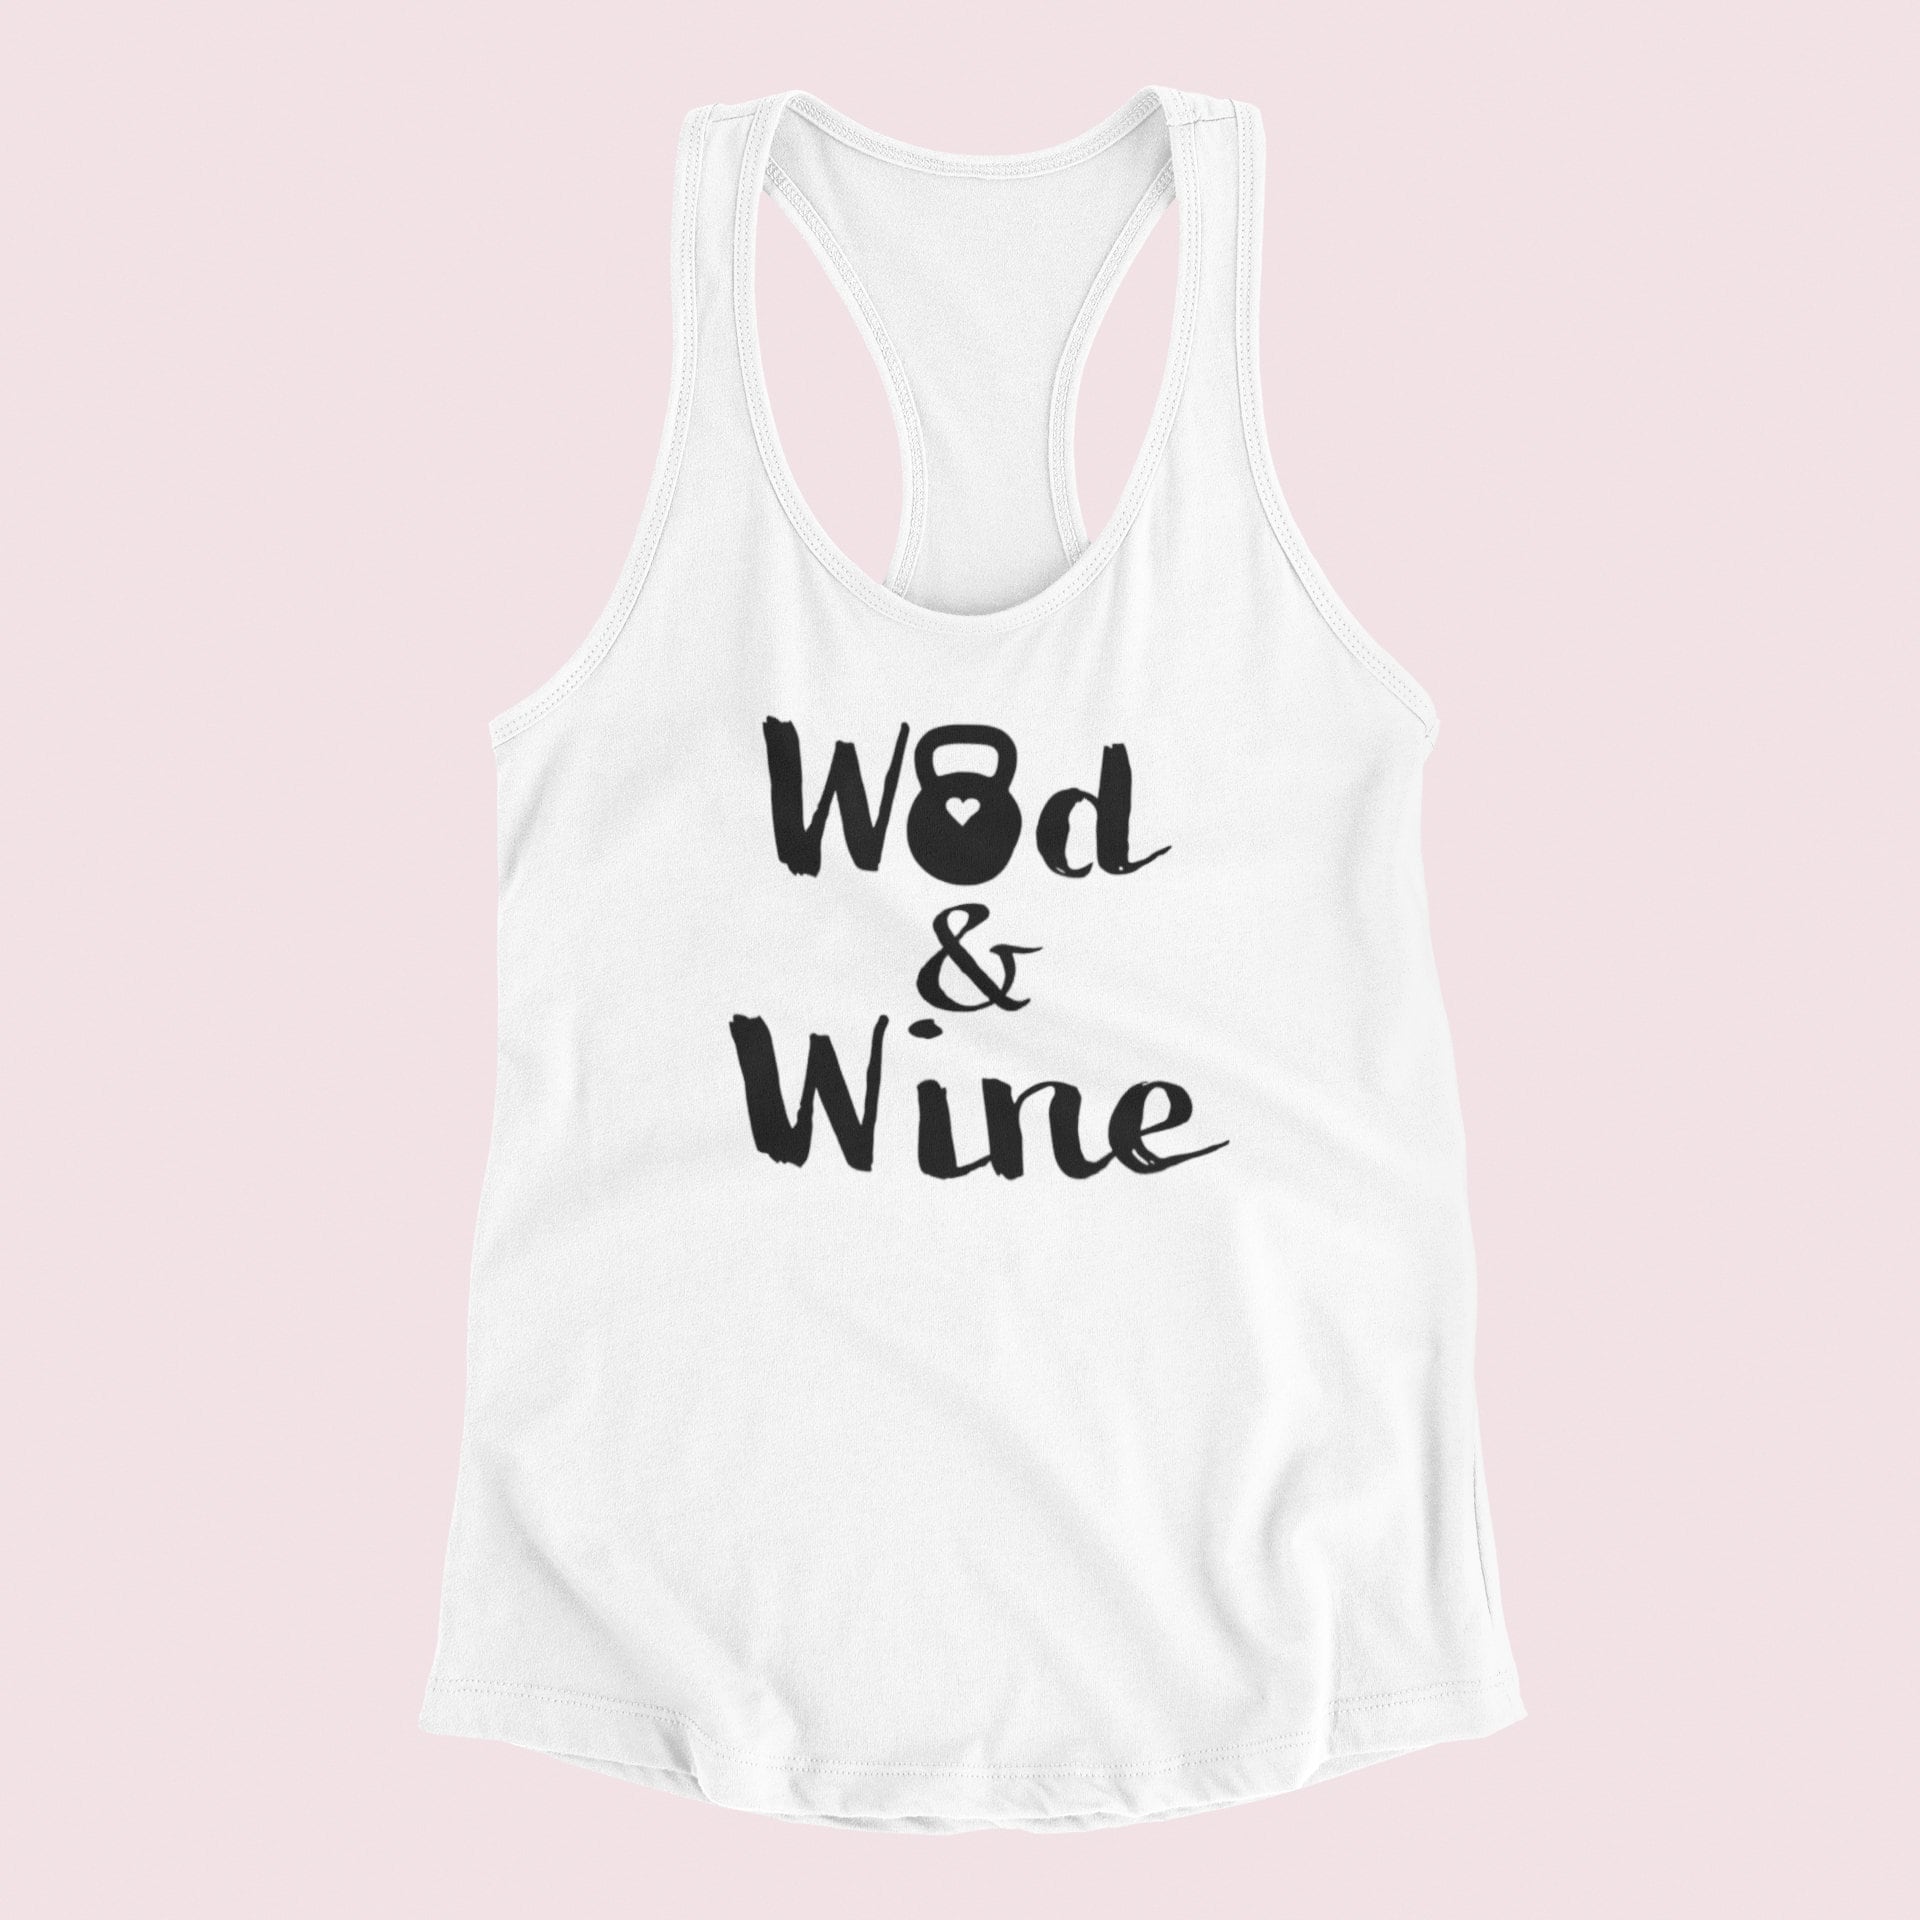 Wow and Wine /Crossfit Mama Tank Crossfitter Tank Top | Etsy